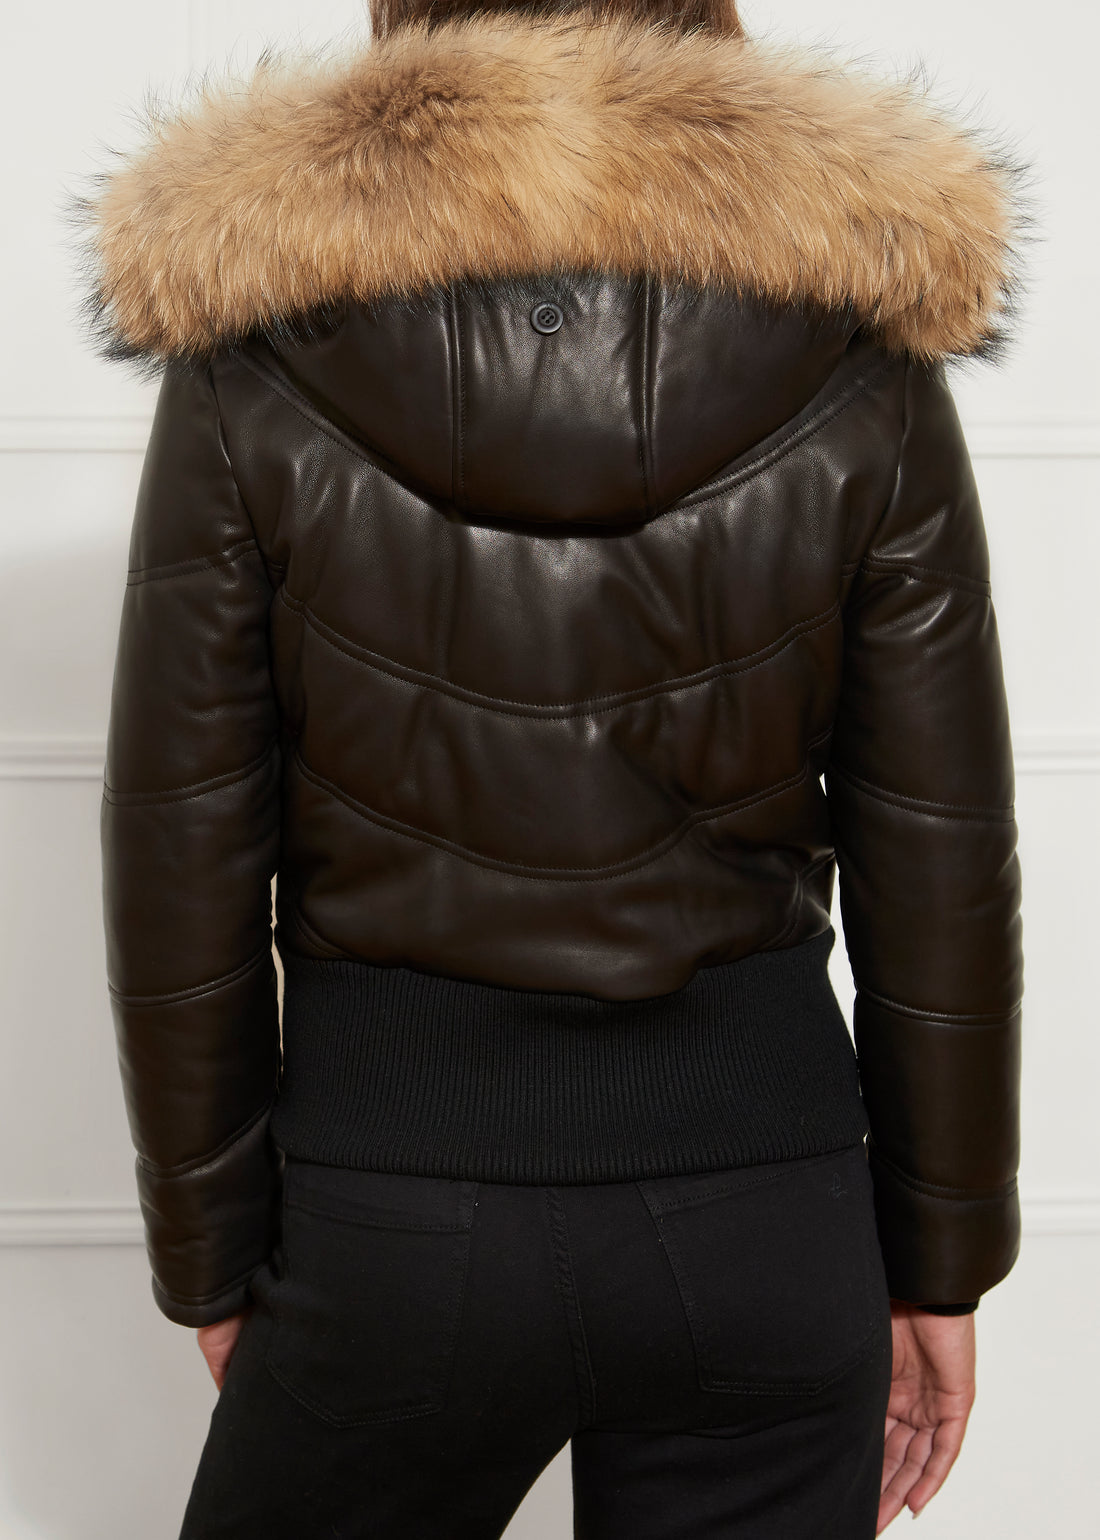 Black Leather Bomber With Fur Trim